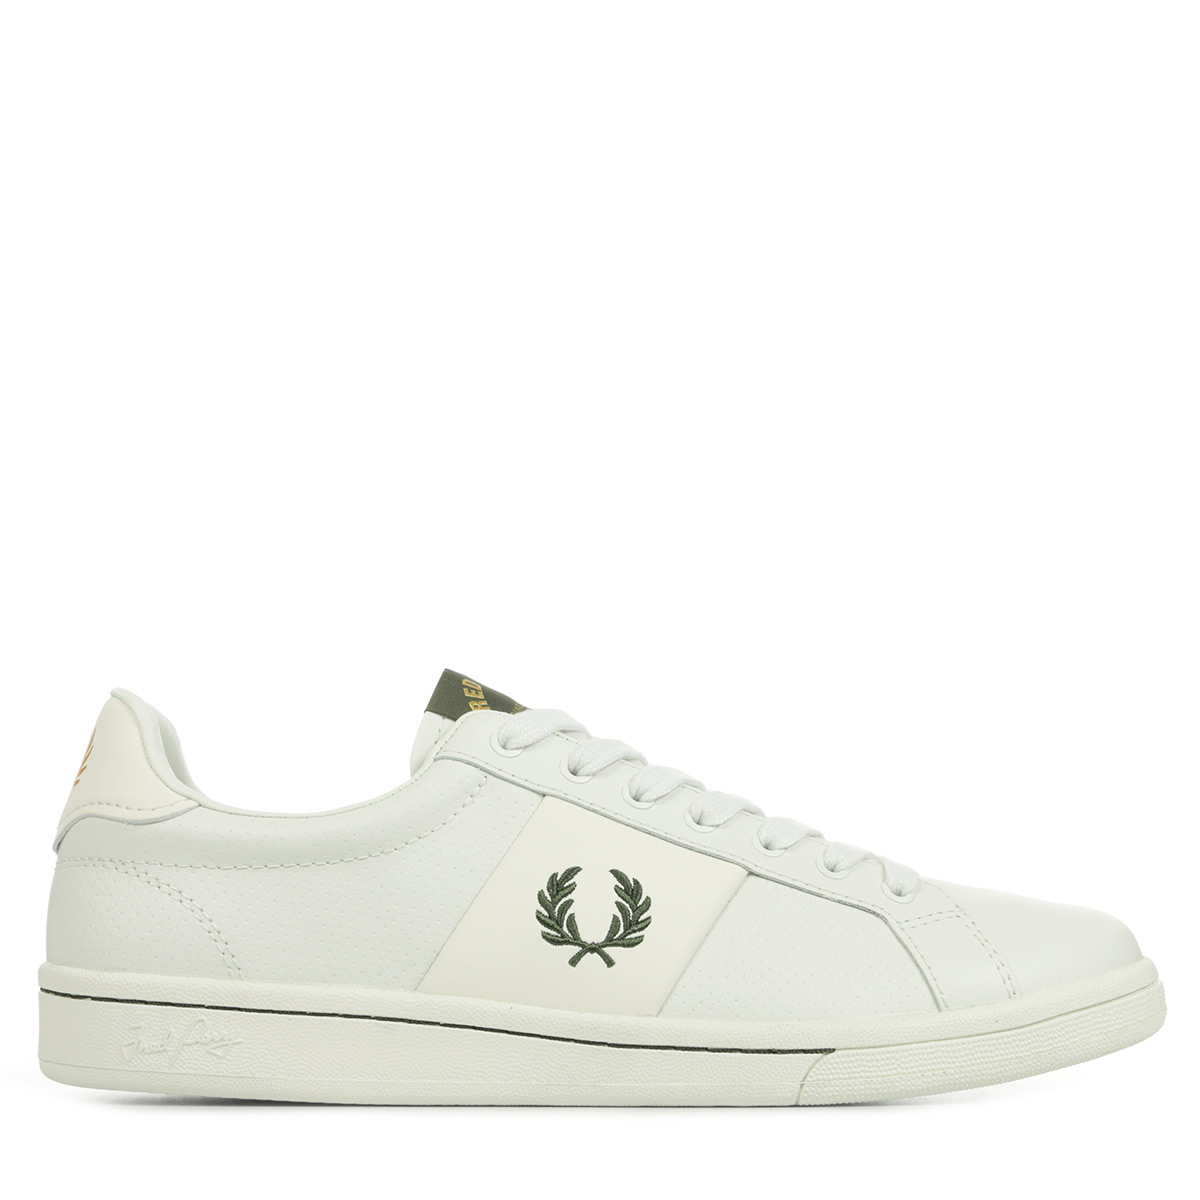 Fred Perry B721 Perf